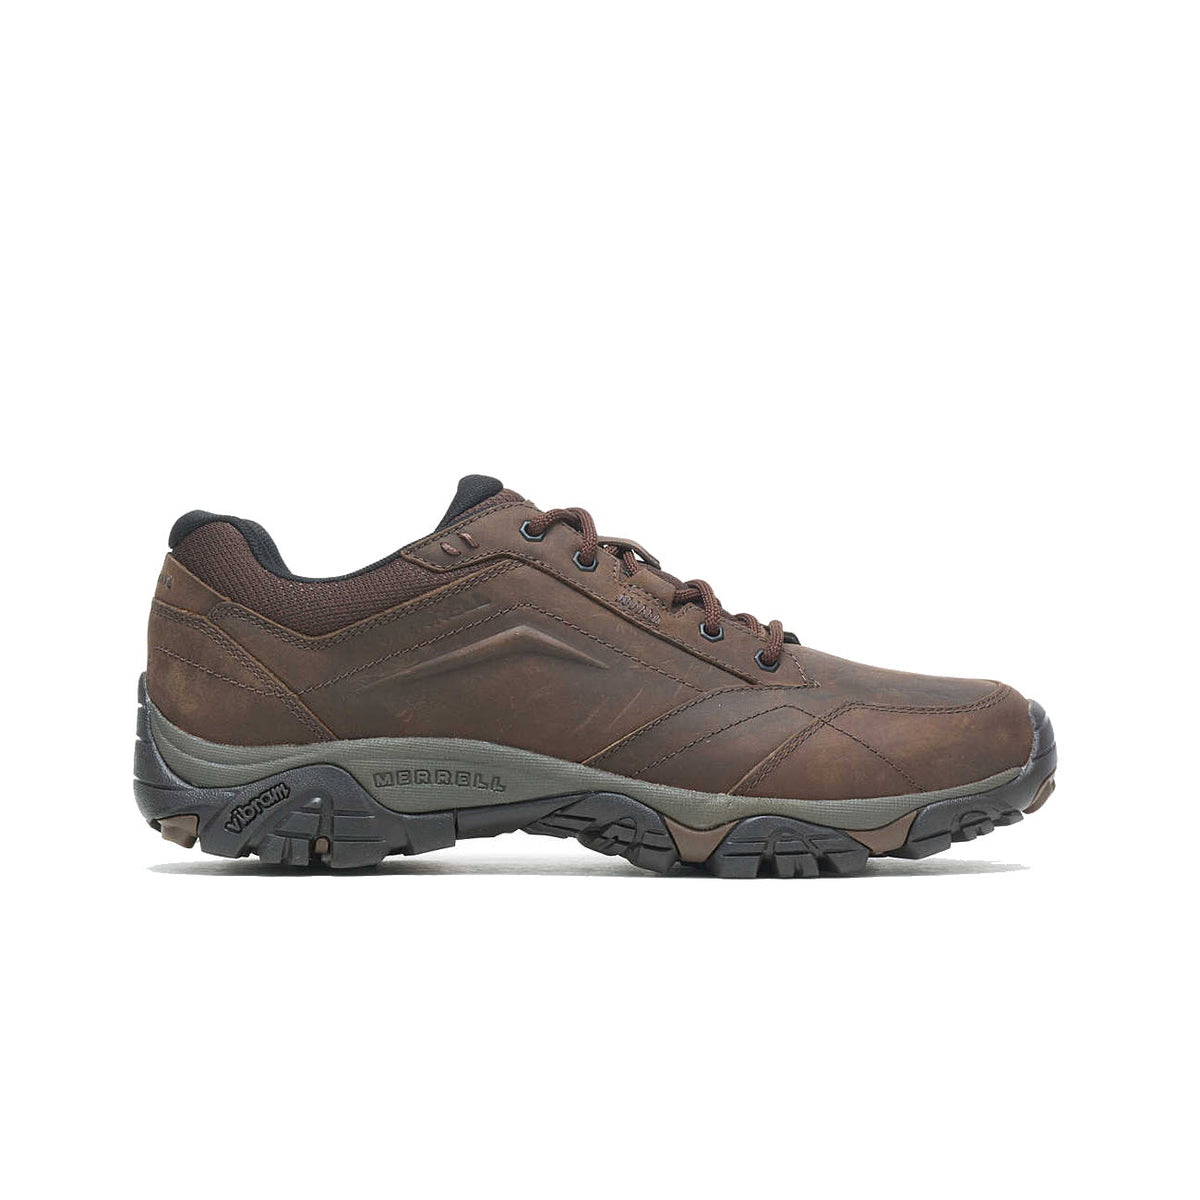 Brown leather Merrell Moab Adventure Lace WP Oxford Dark Earth hiking shoe on a white background, designed for all-day comfort.